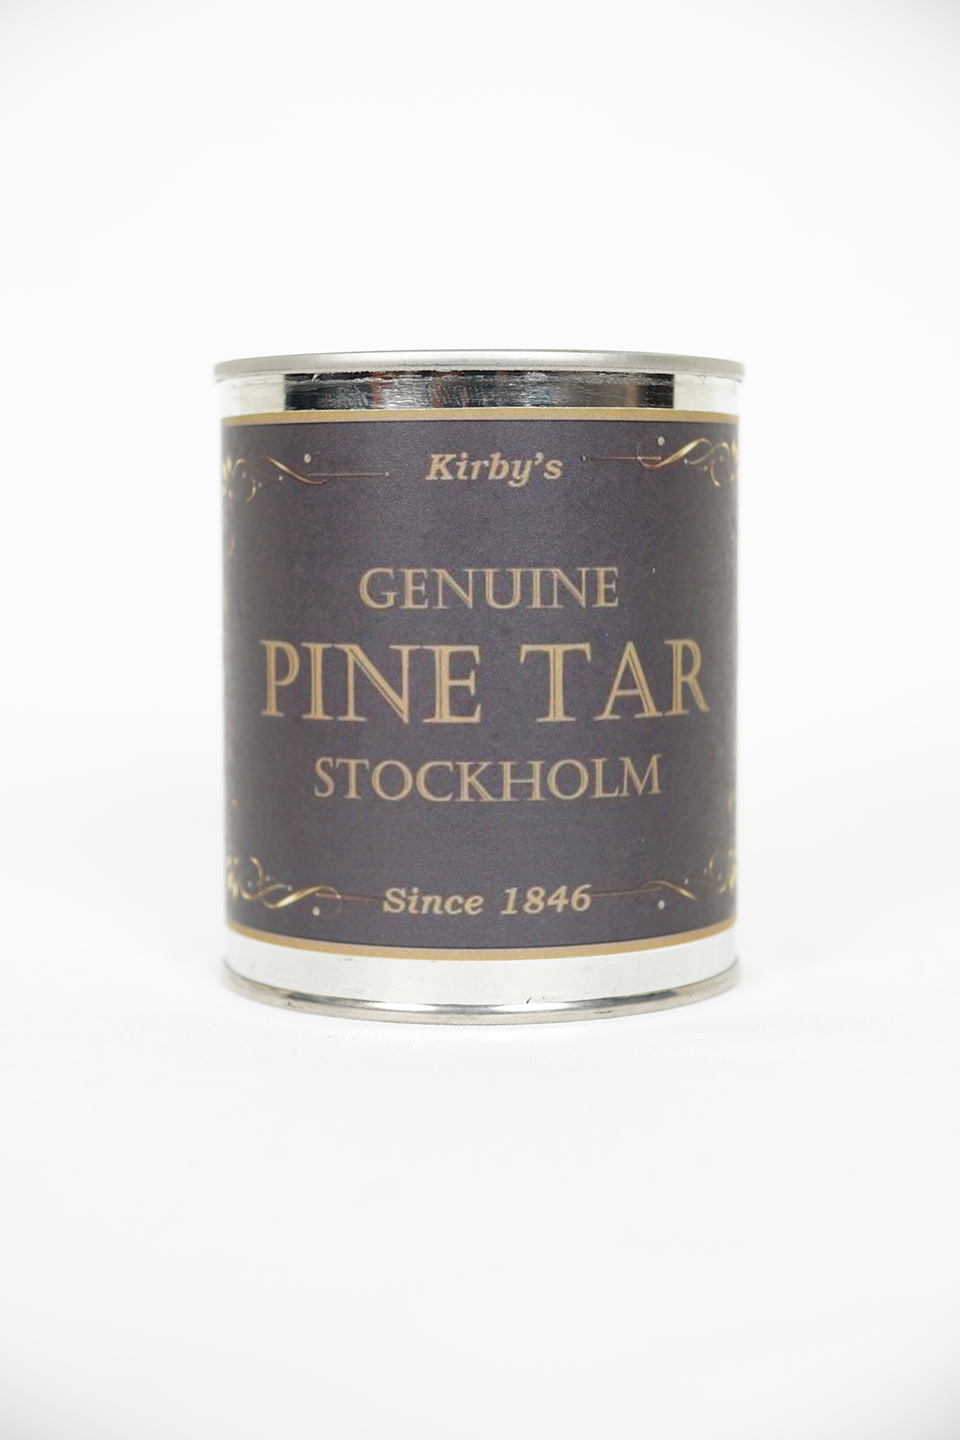 Where Can You Buy Pine Tar that Effectively Preserves Wood?